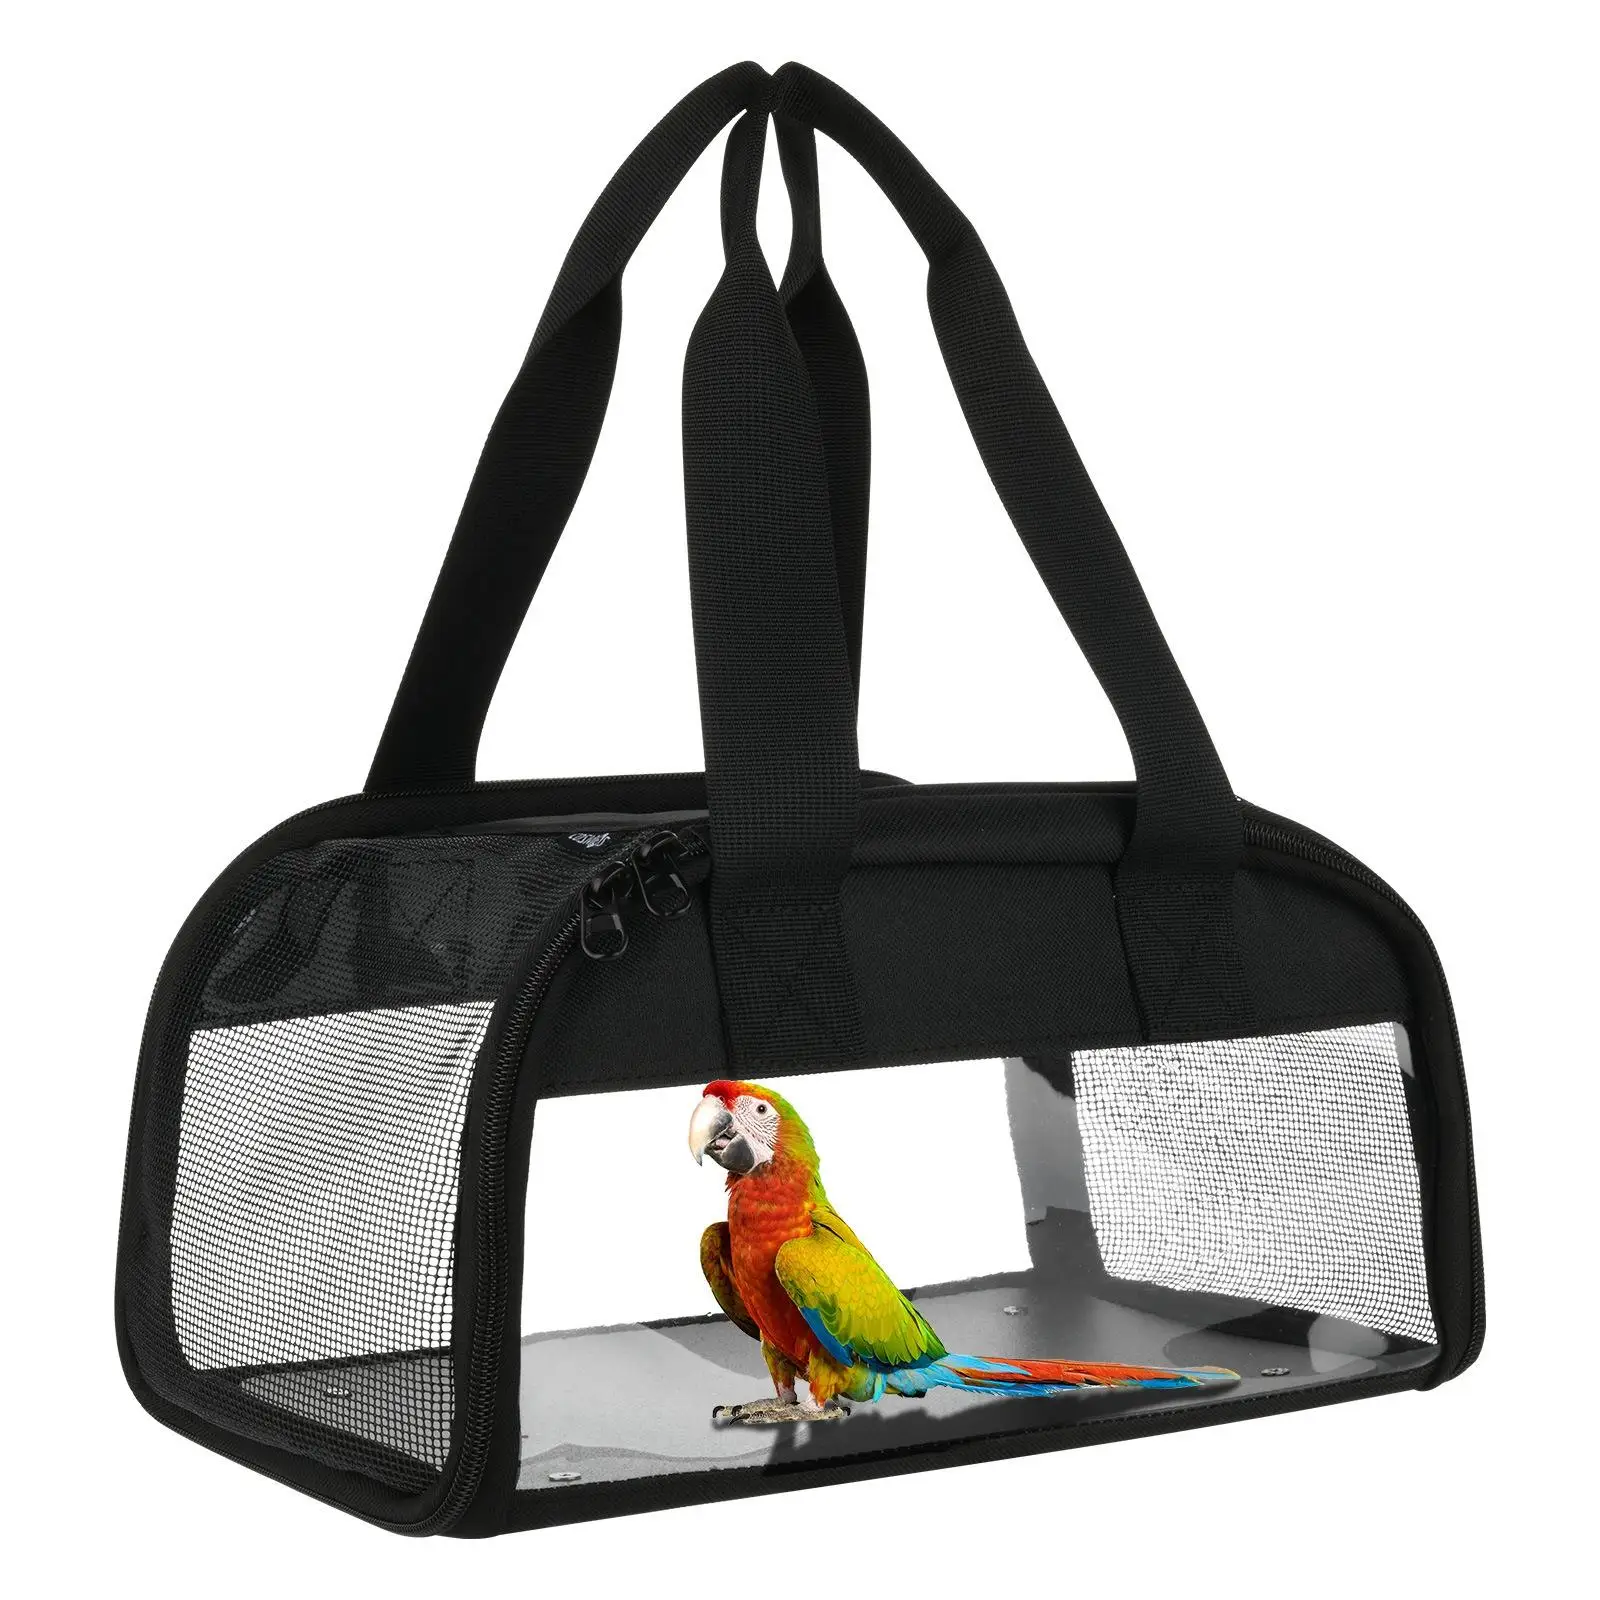 Pet Carrier Bag Parrot Cockatiel Parakeet Carrying Case Breathable Kitty Foldable Travel Birds Cage for Park Shopping Walking